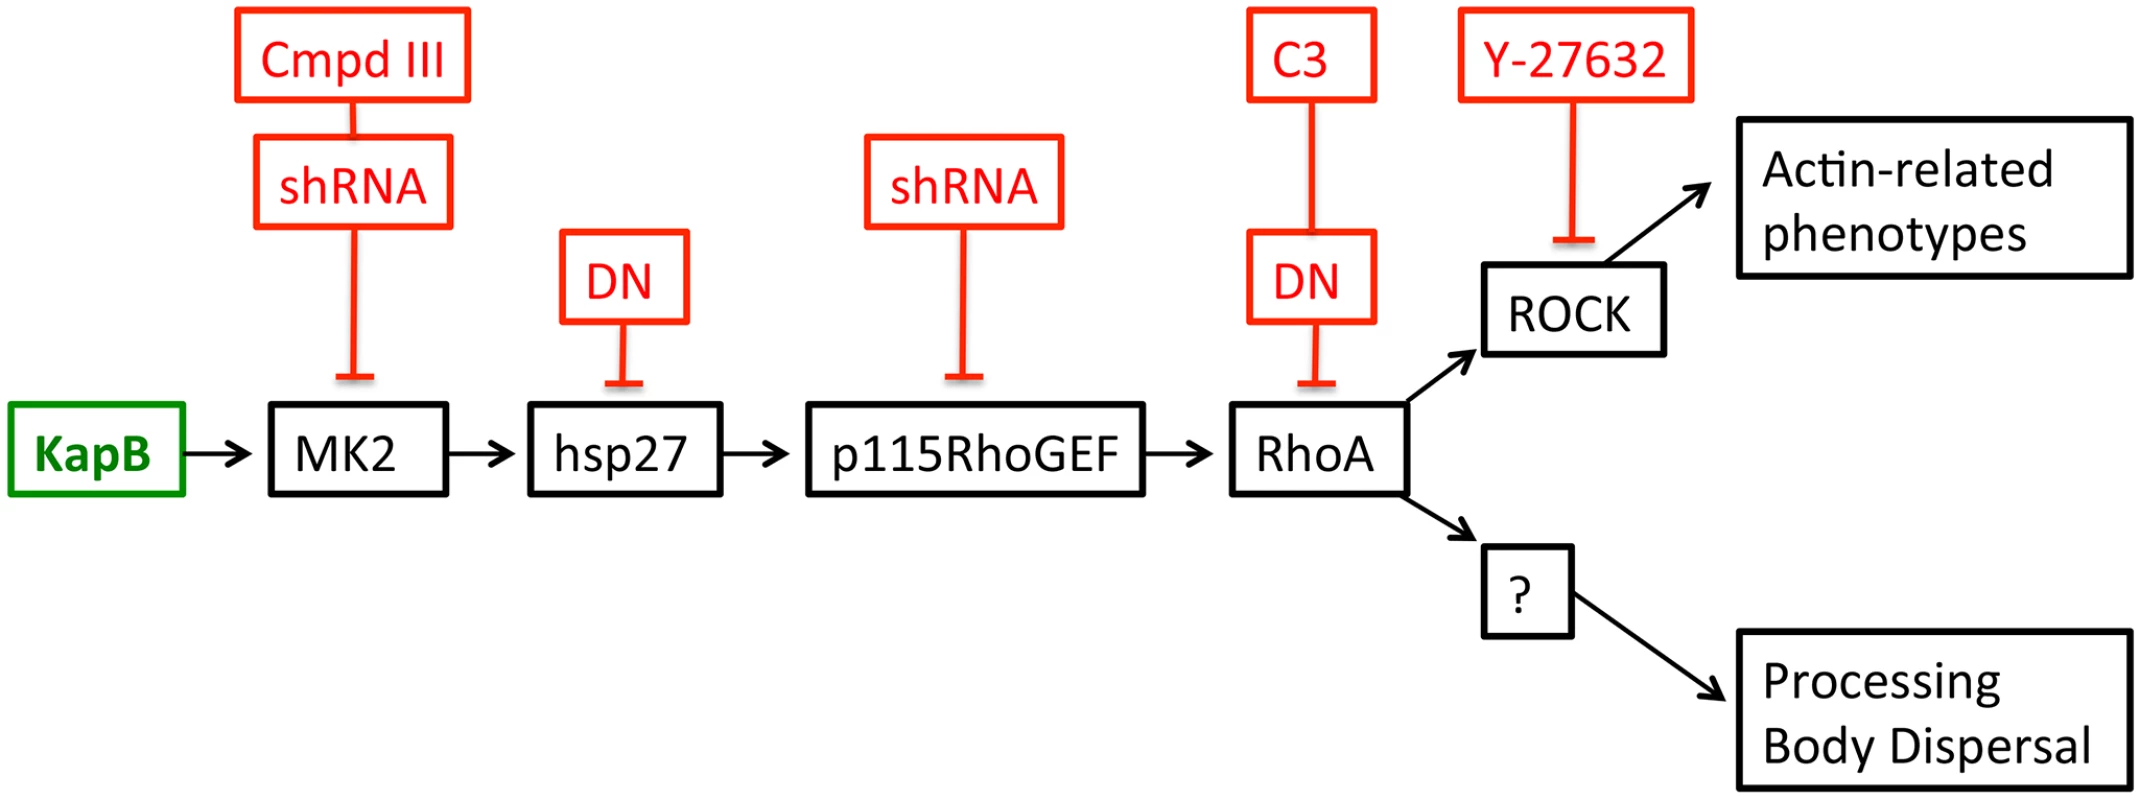 KapB activation of MK2 can lead to RhoA through intermediates hsp27 and p115RhoGEF.